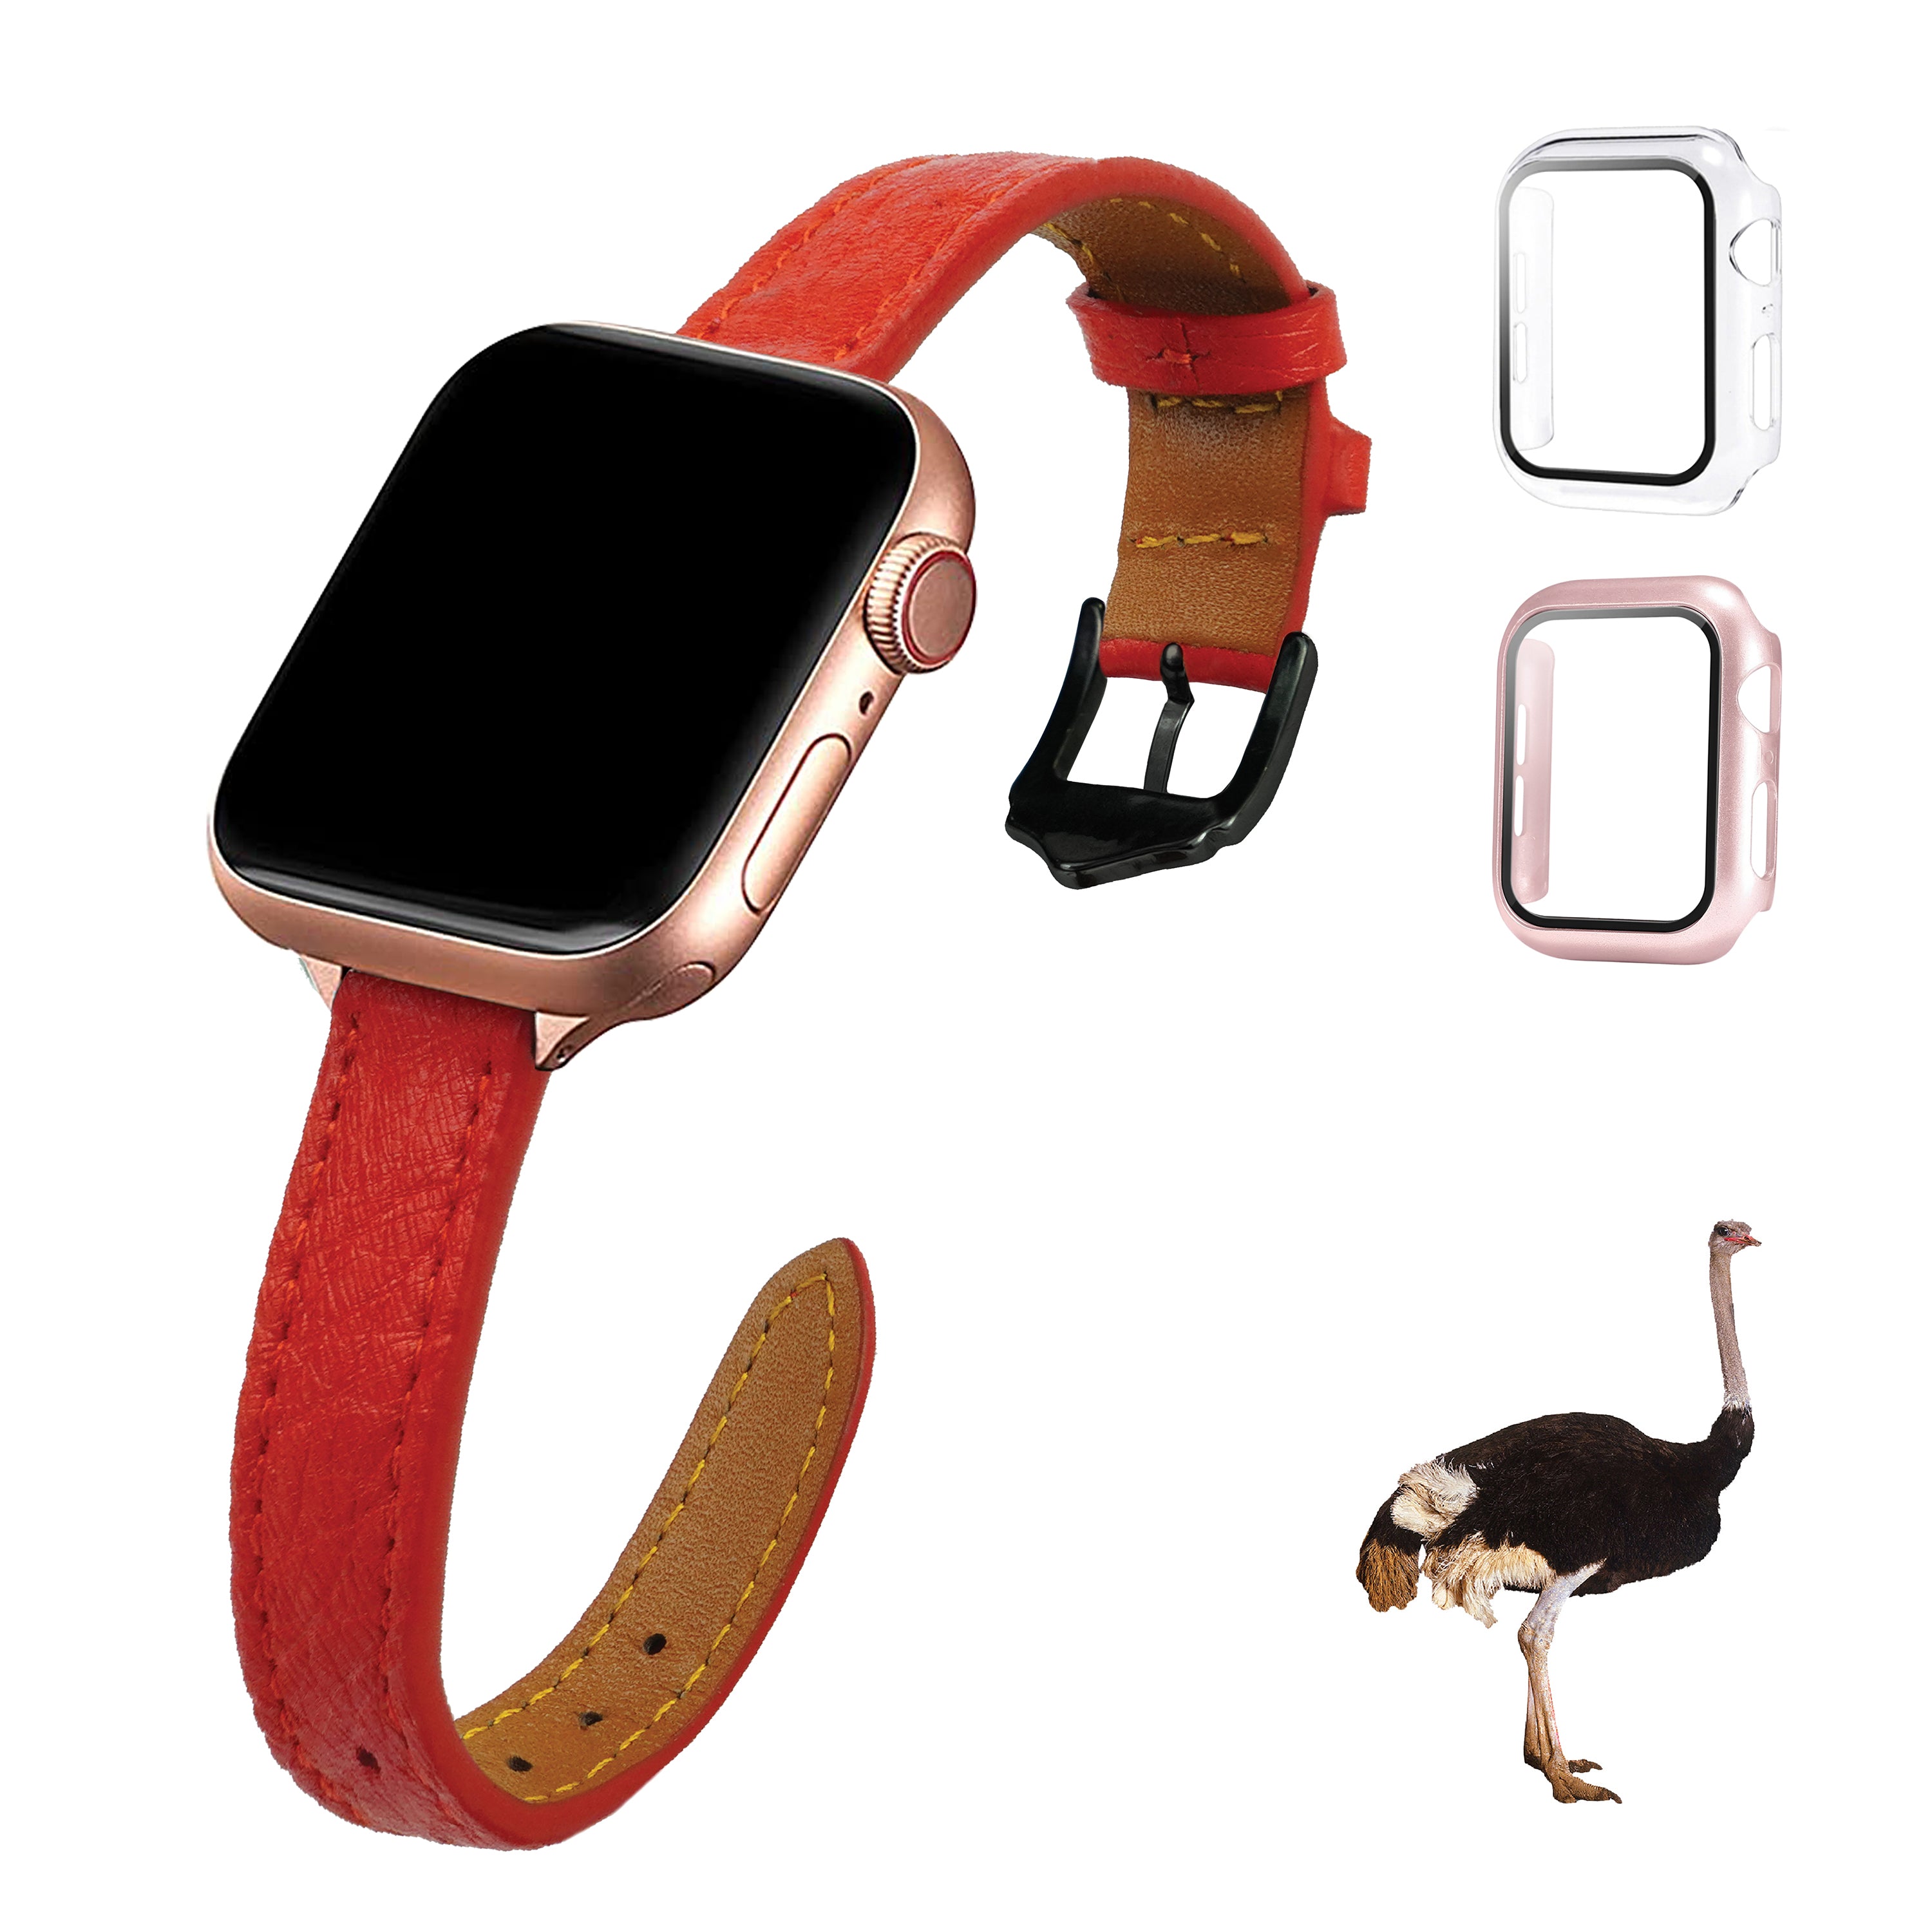 Red Flat Ostrich Leather Band Compatible Apple Watch Iwatch 38mm Screen Protector Case Black Adapter Replacement Strap For Smartwatch Series 1 2 3 Leather Handmade AW-190B-W-38MM